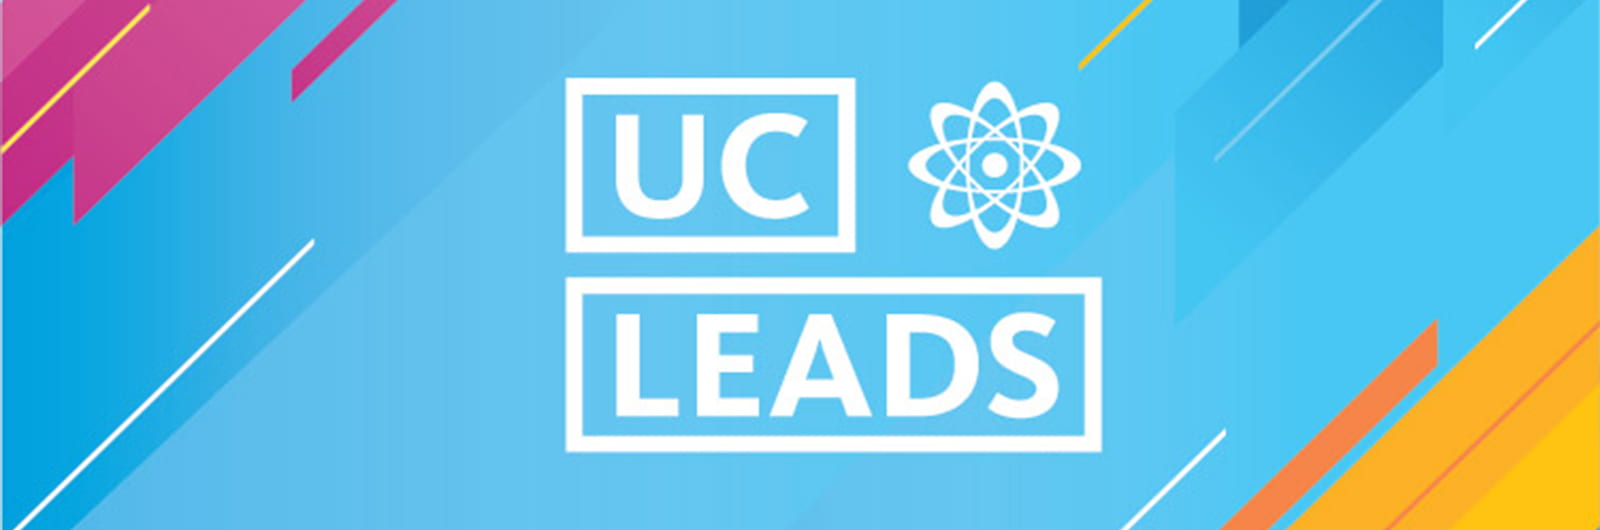 Leadership Excellence through Advanced Degrees (UC Leads)